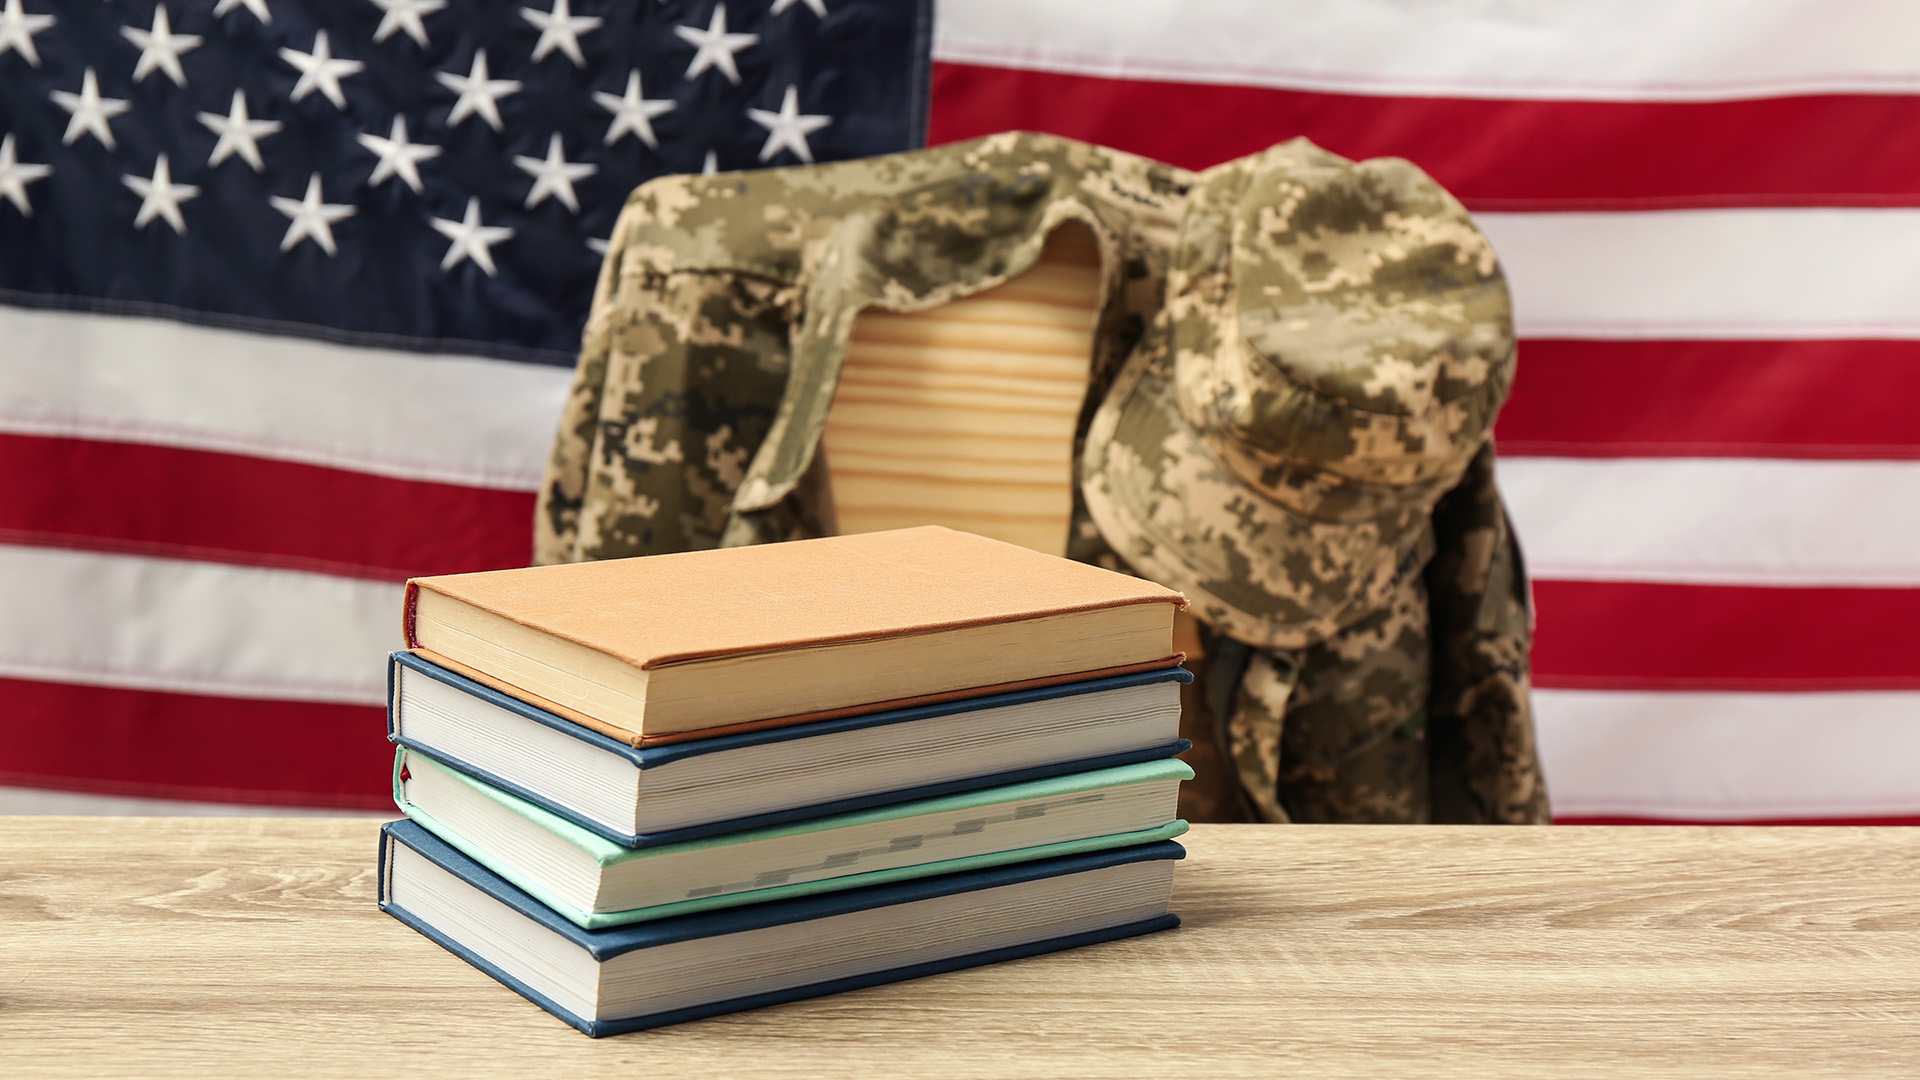 A desk with a stack of books sitting on top. Behind the desk is a chair with a military jacket draped over its back. In the background is the American flag.